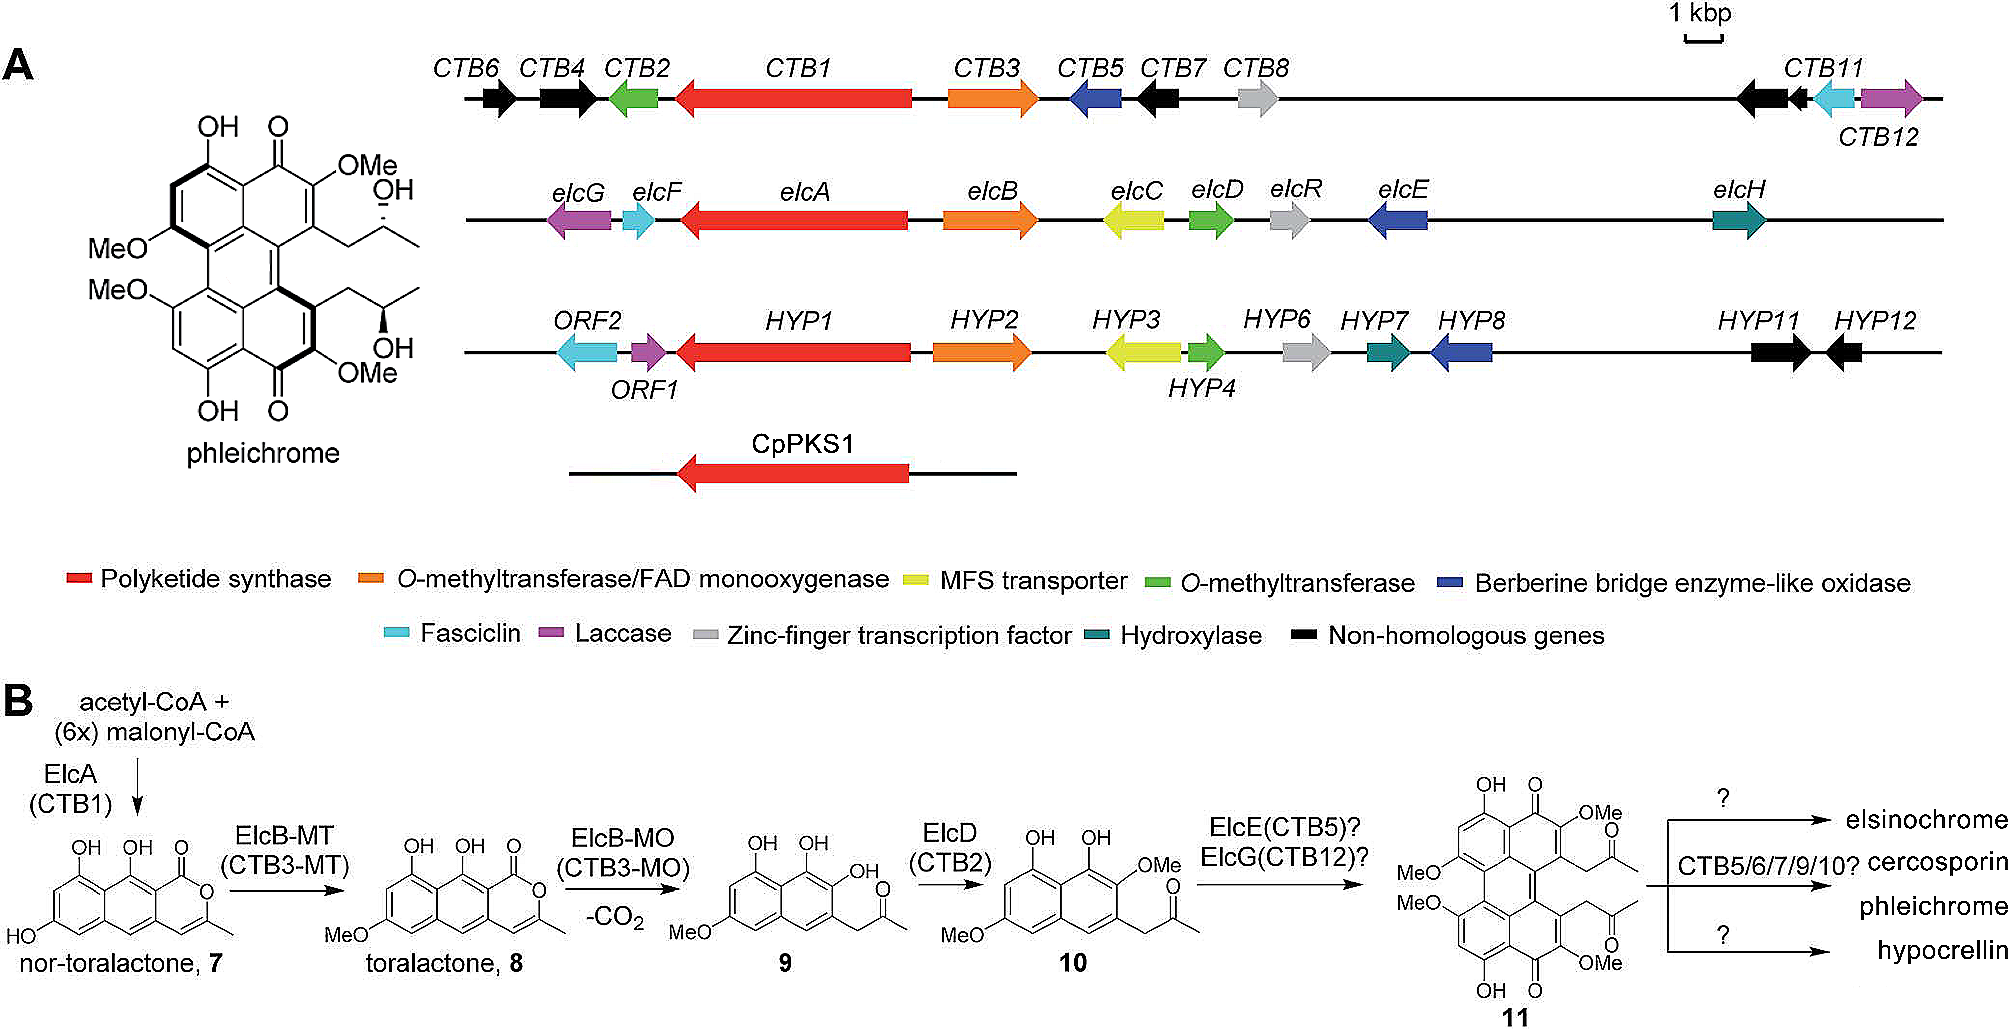 Metabolic engineering of Saccharomyces cerevisiae for the biosynthesis of a fungal pigment from the phytopathogenic fungus Cladosporium phlei